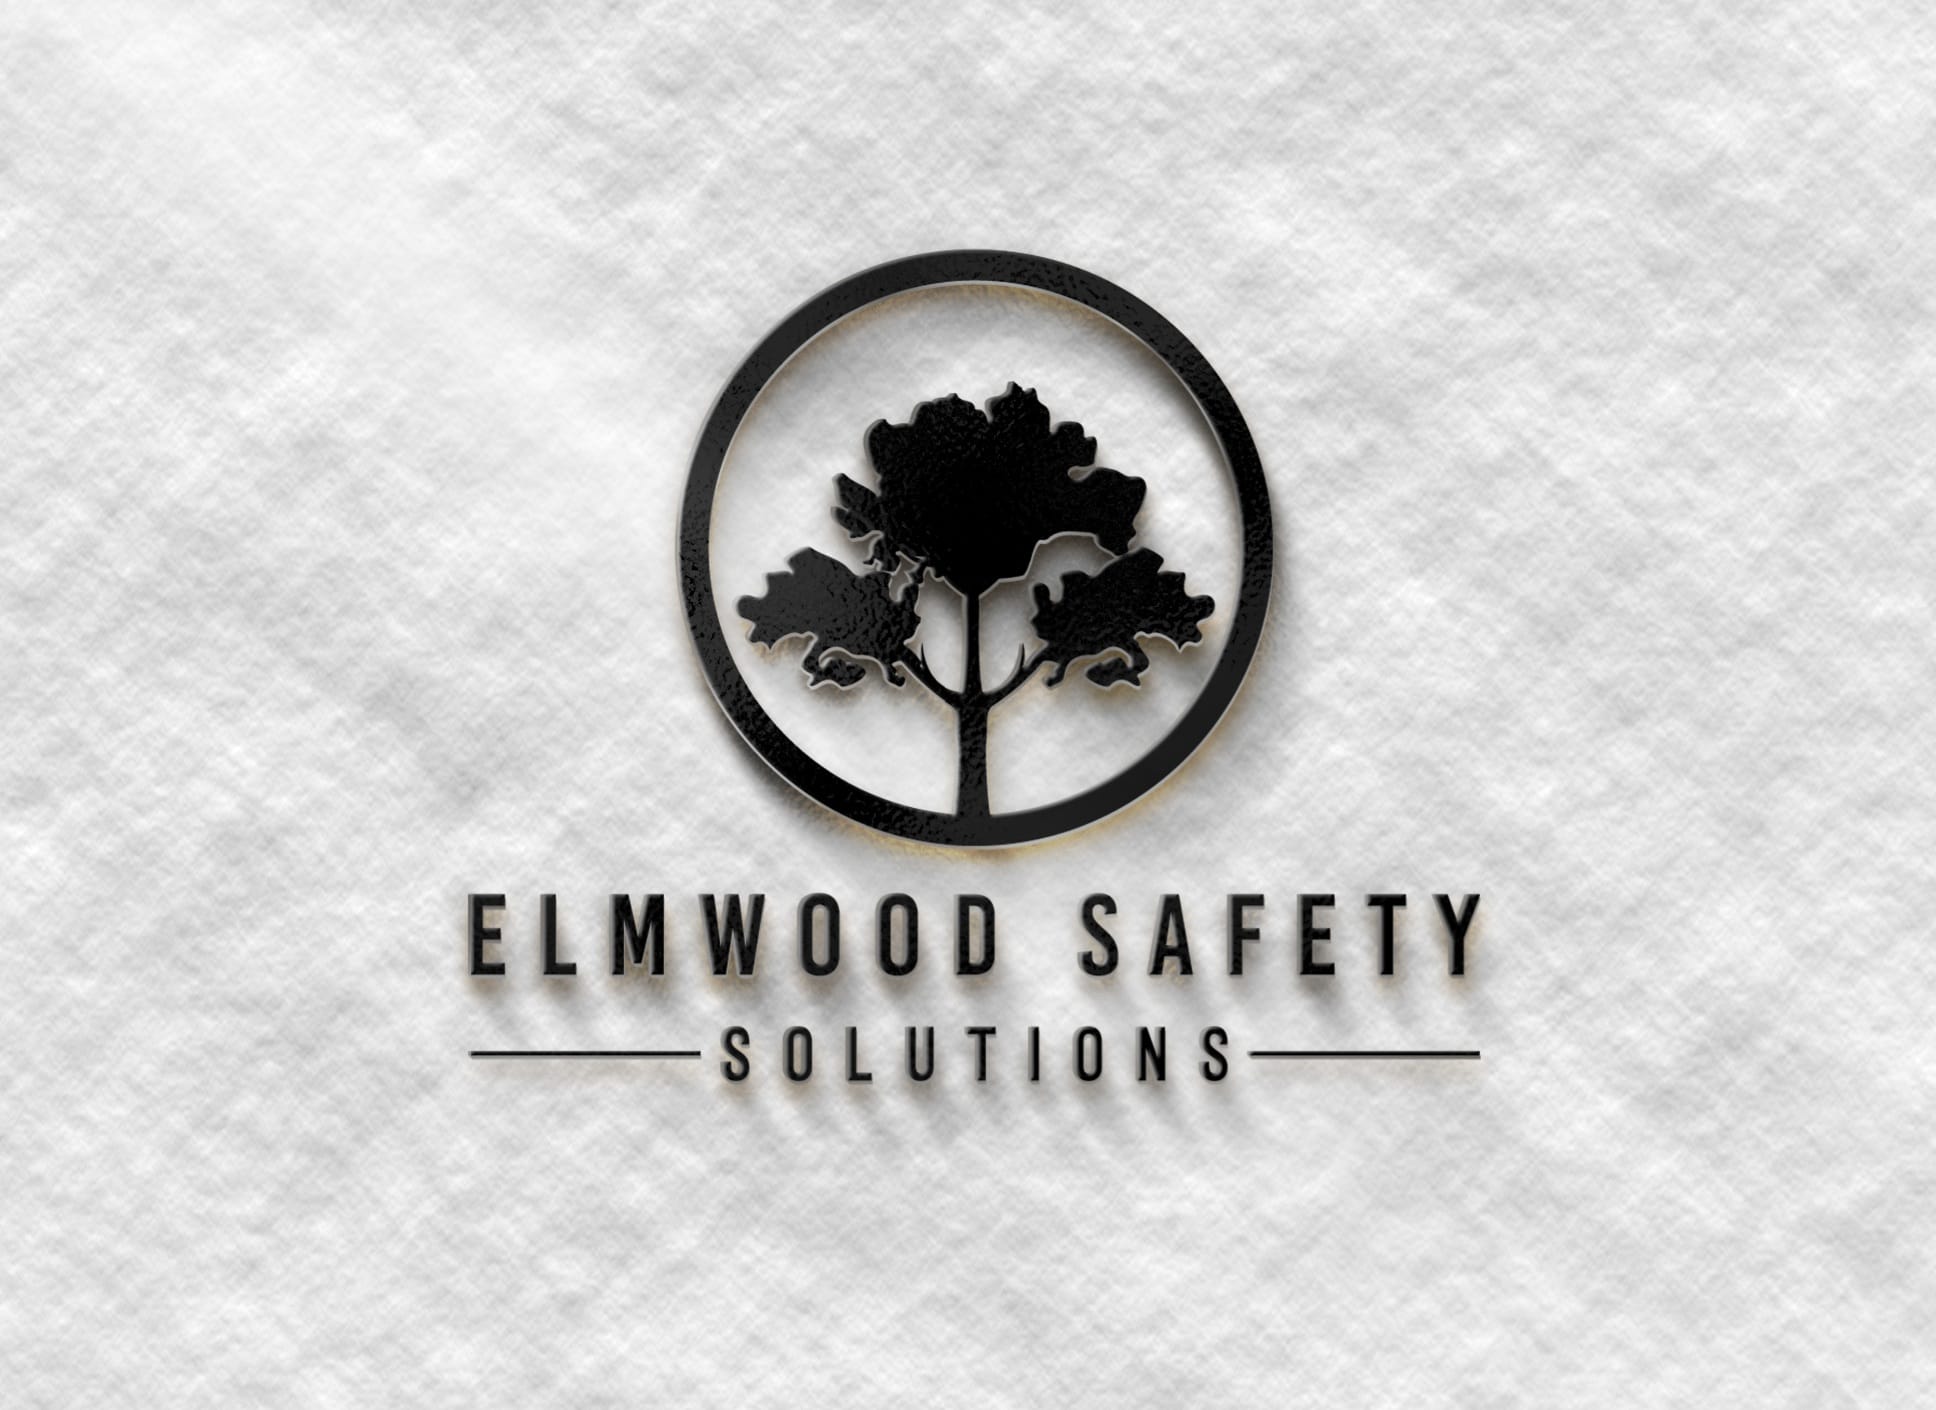 Elmwood Safety Solutions - Consultancy and Training Provider